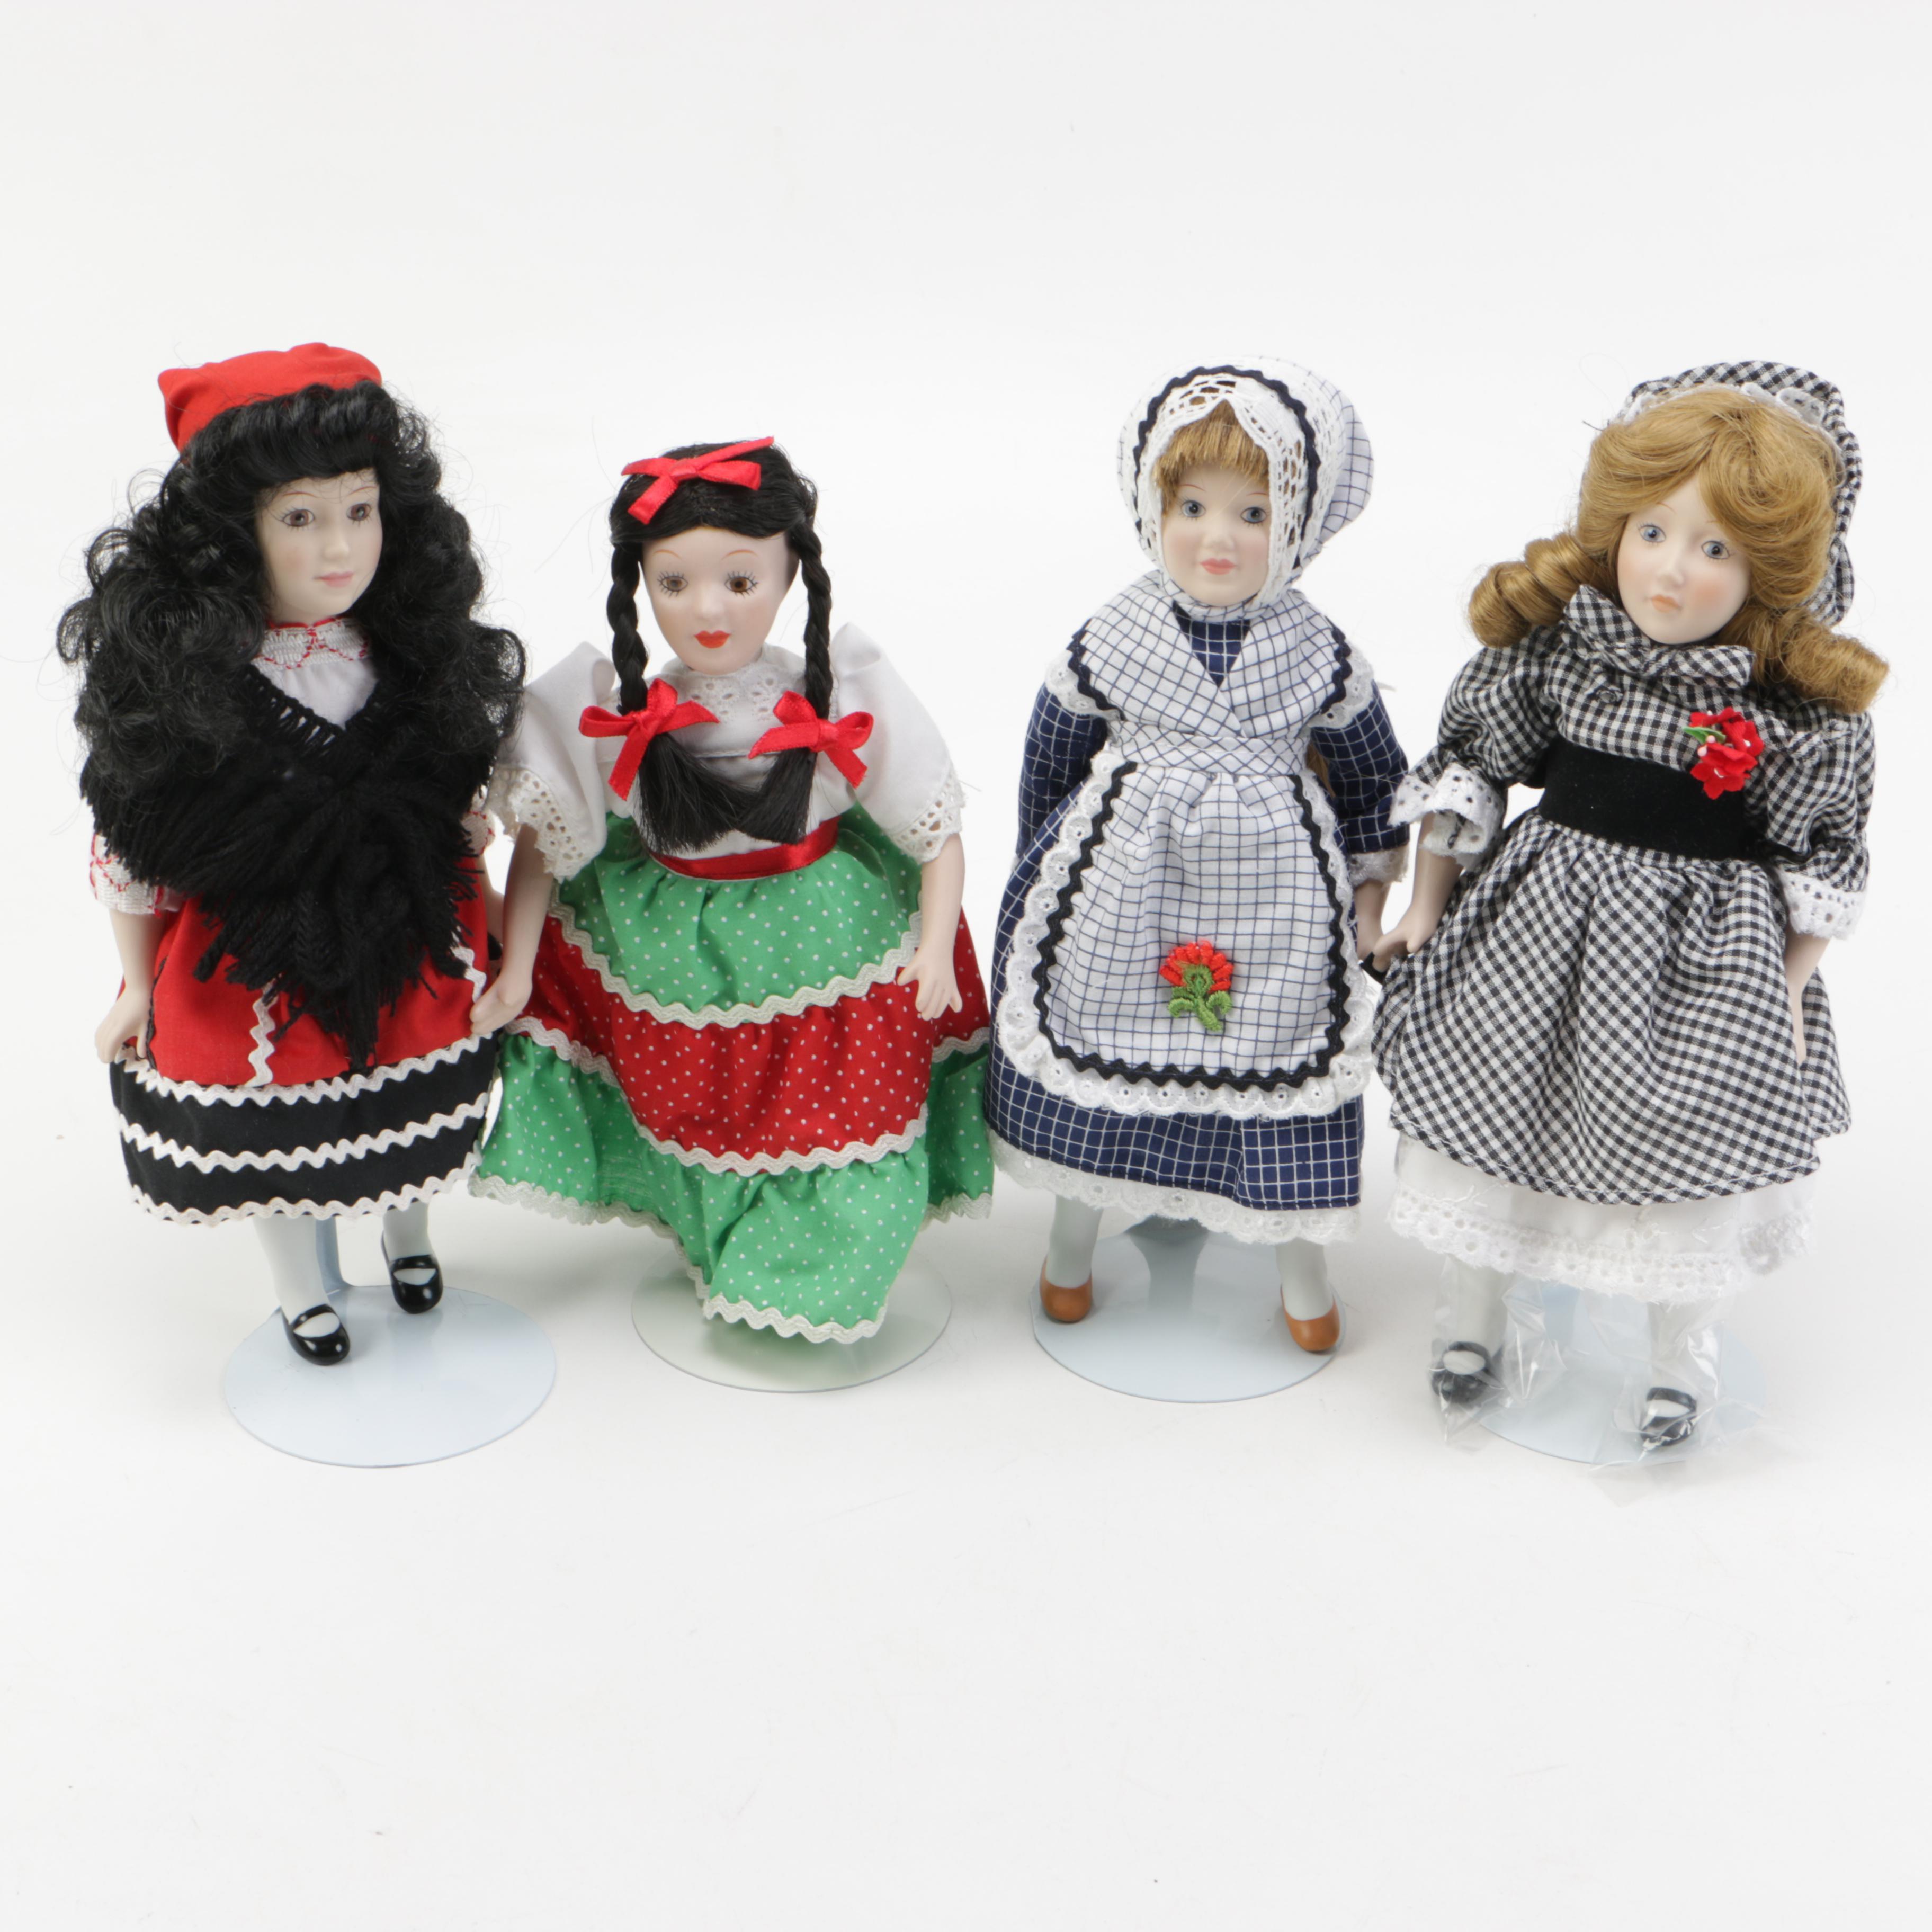 danbury mint dolls of the world collection